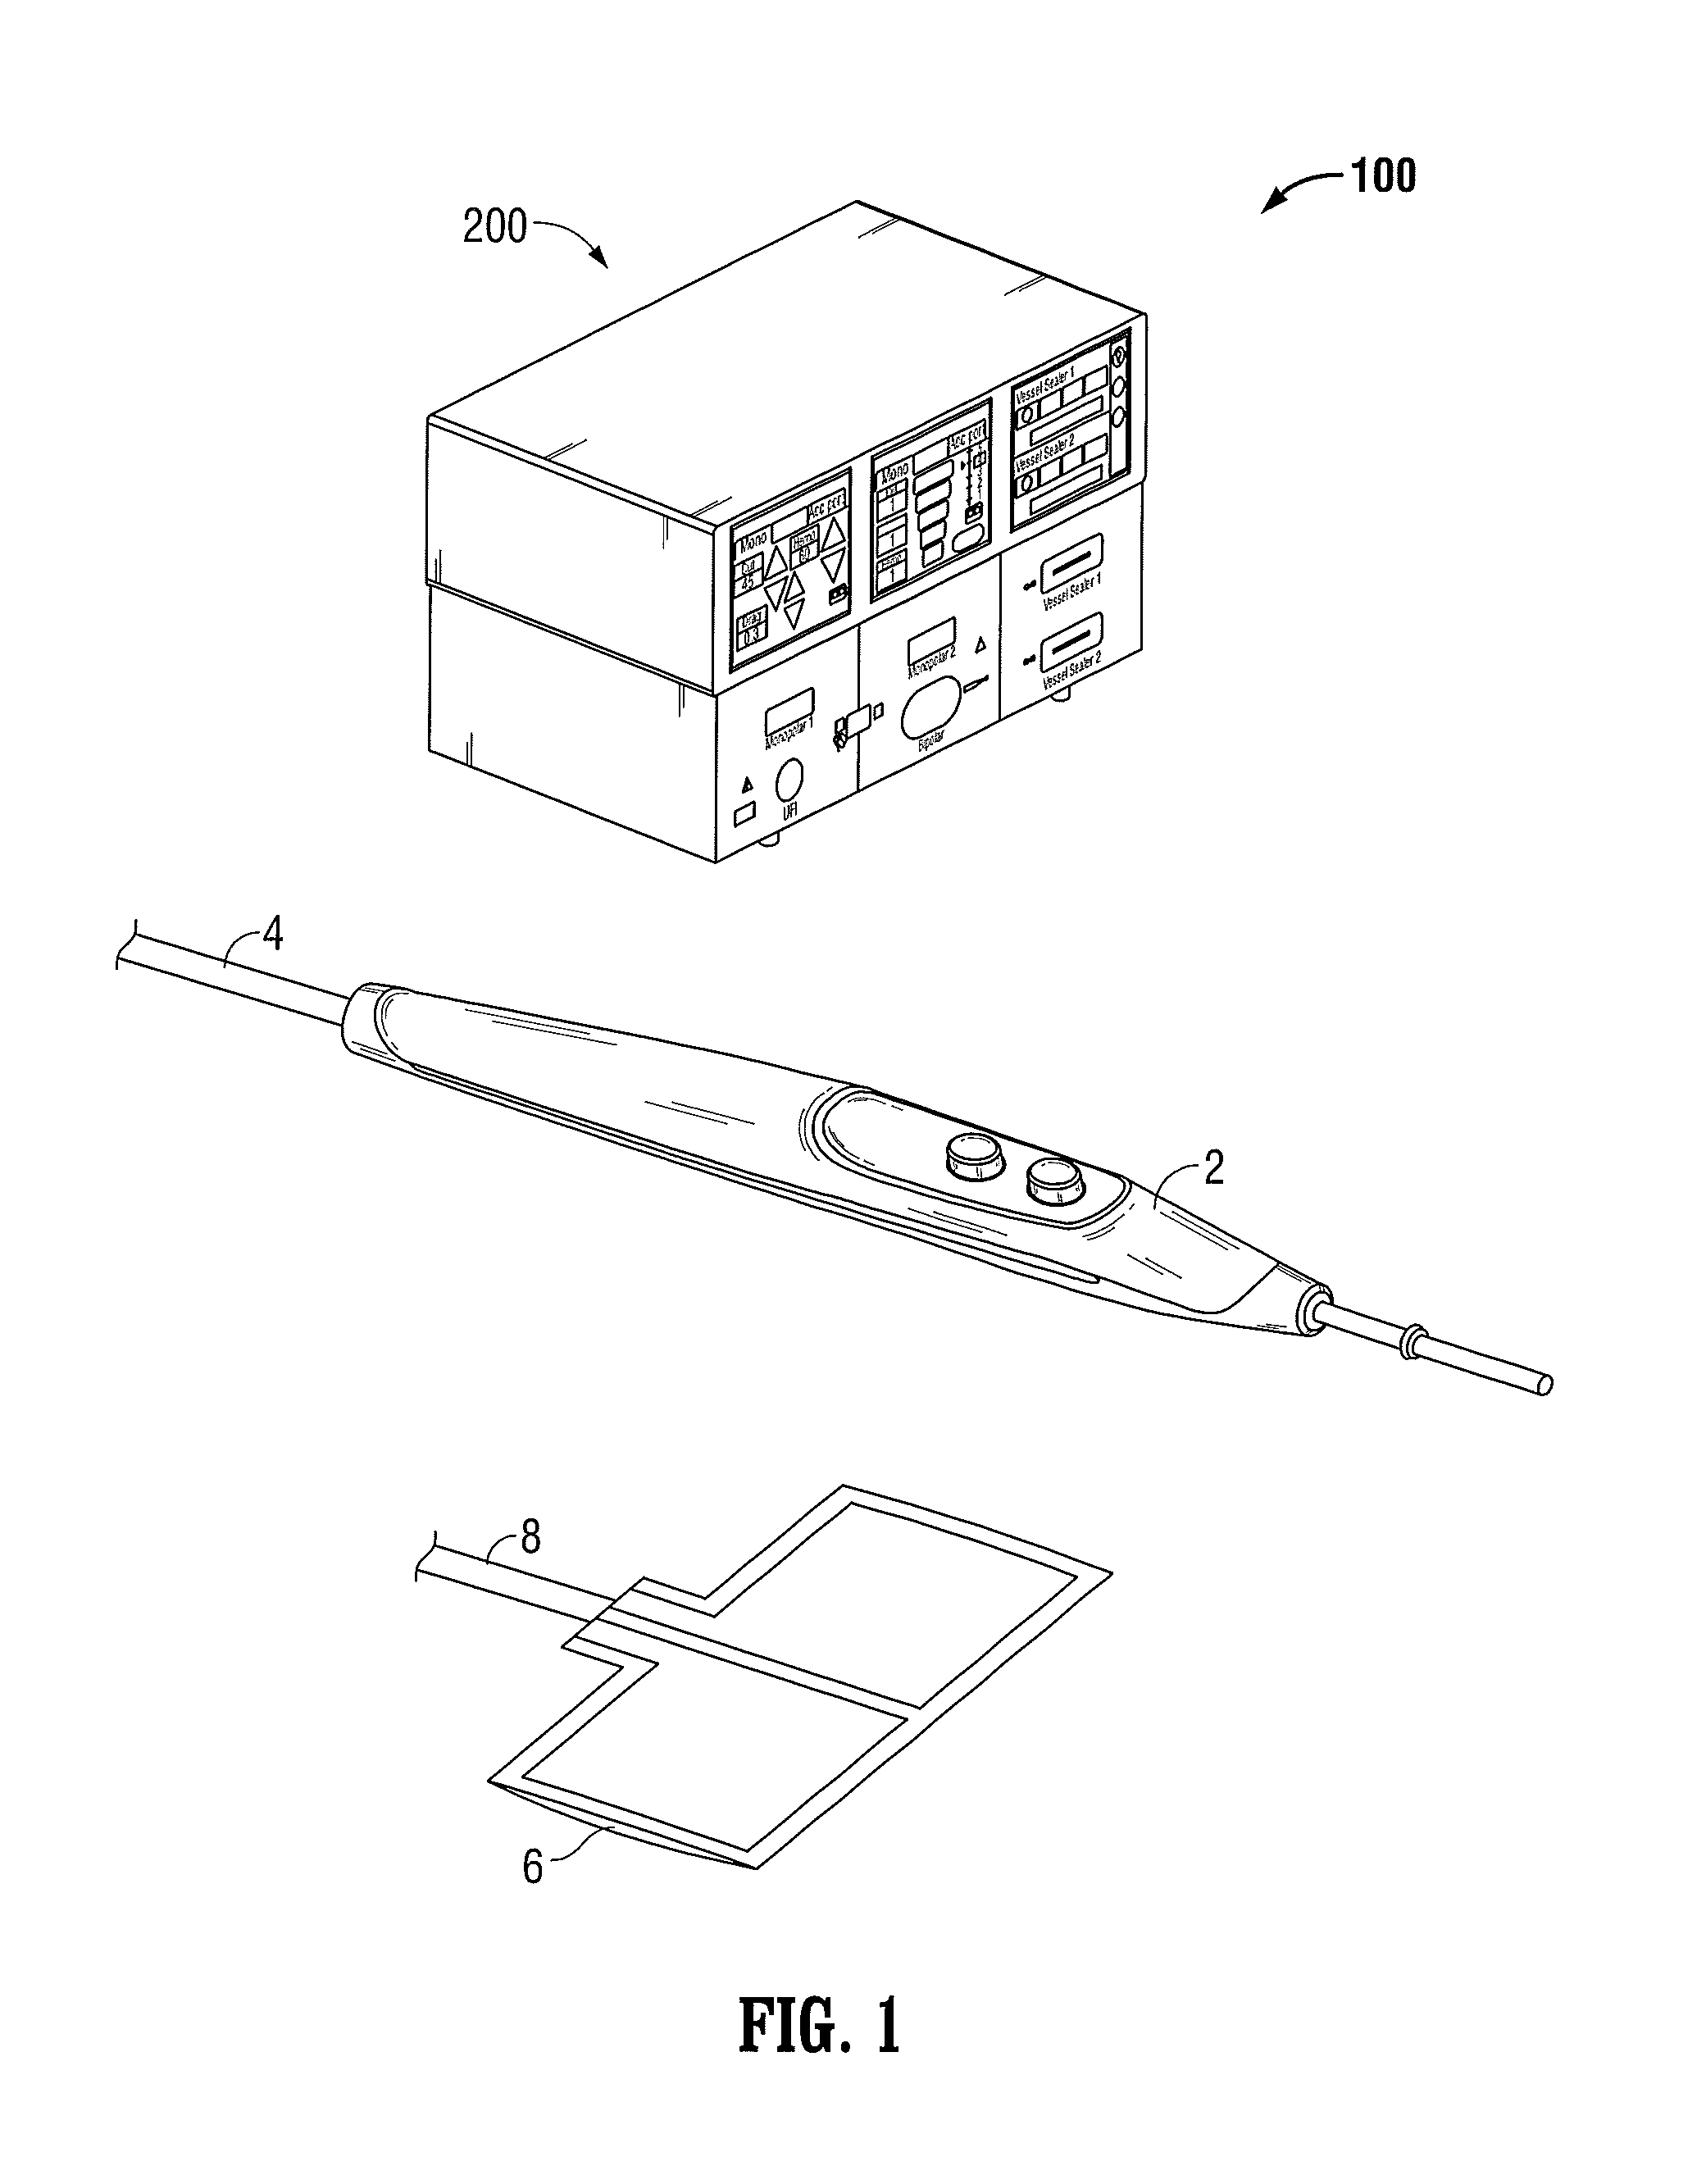 Systems and methods for arc detection and drag adjustment